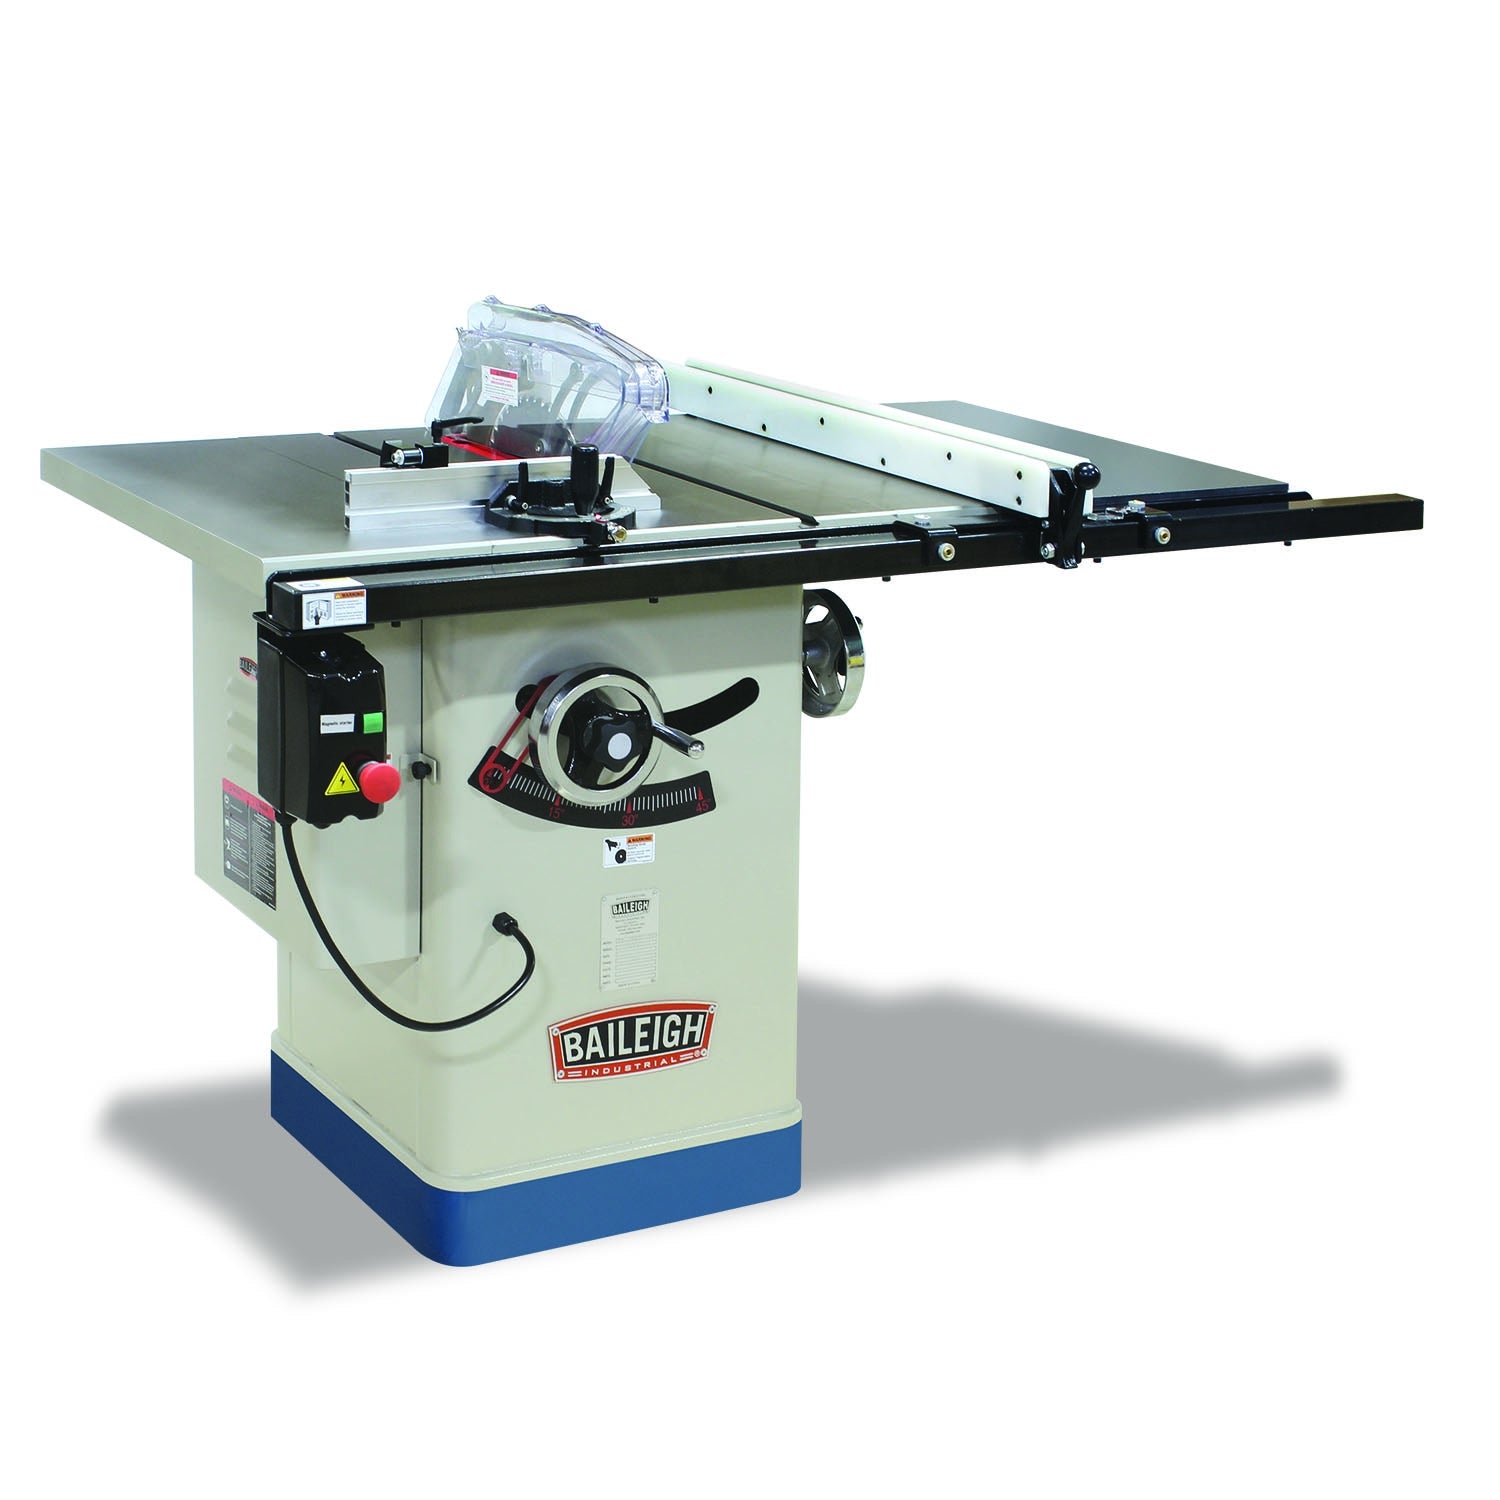 Baileigh TS-1040E-30-V3 220V 1 Phase, 10" Entry Level Cabinet Style Table Saw, 40" x 27" Table